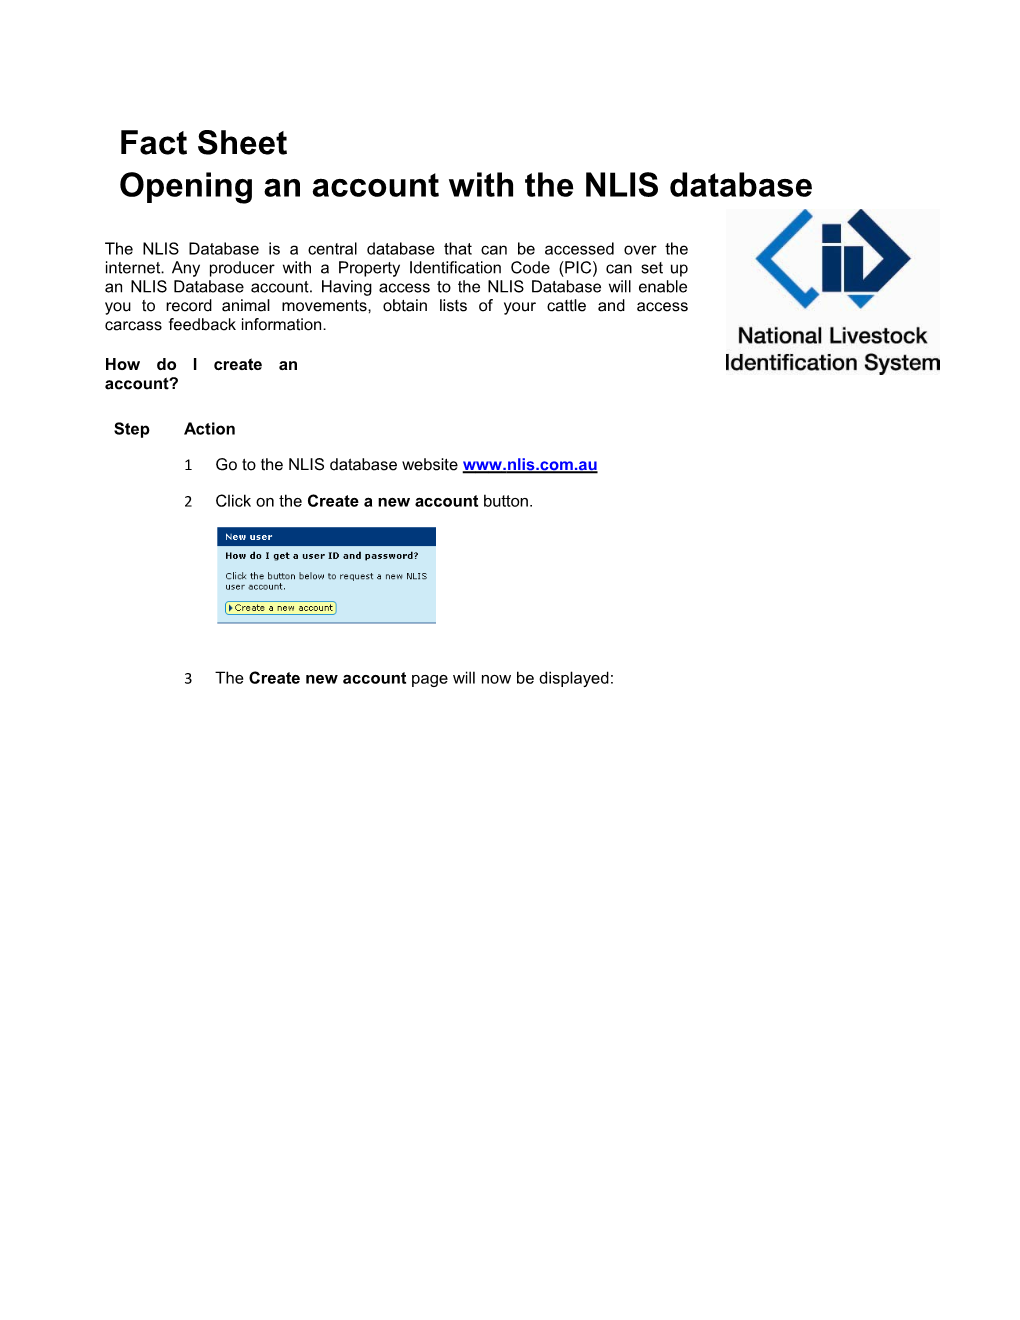 Fact Sheet Opening an Account with the NLIS Database